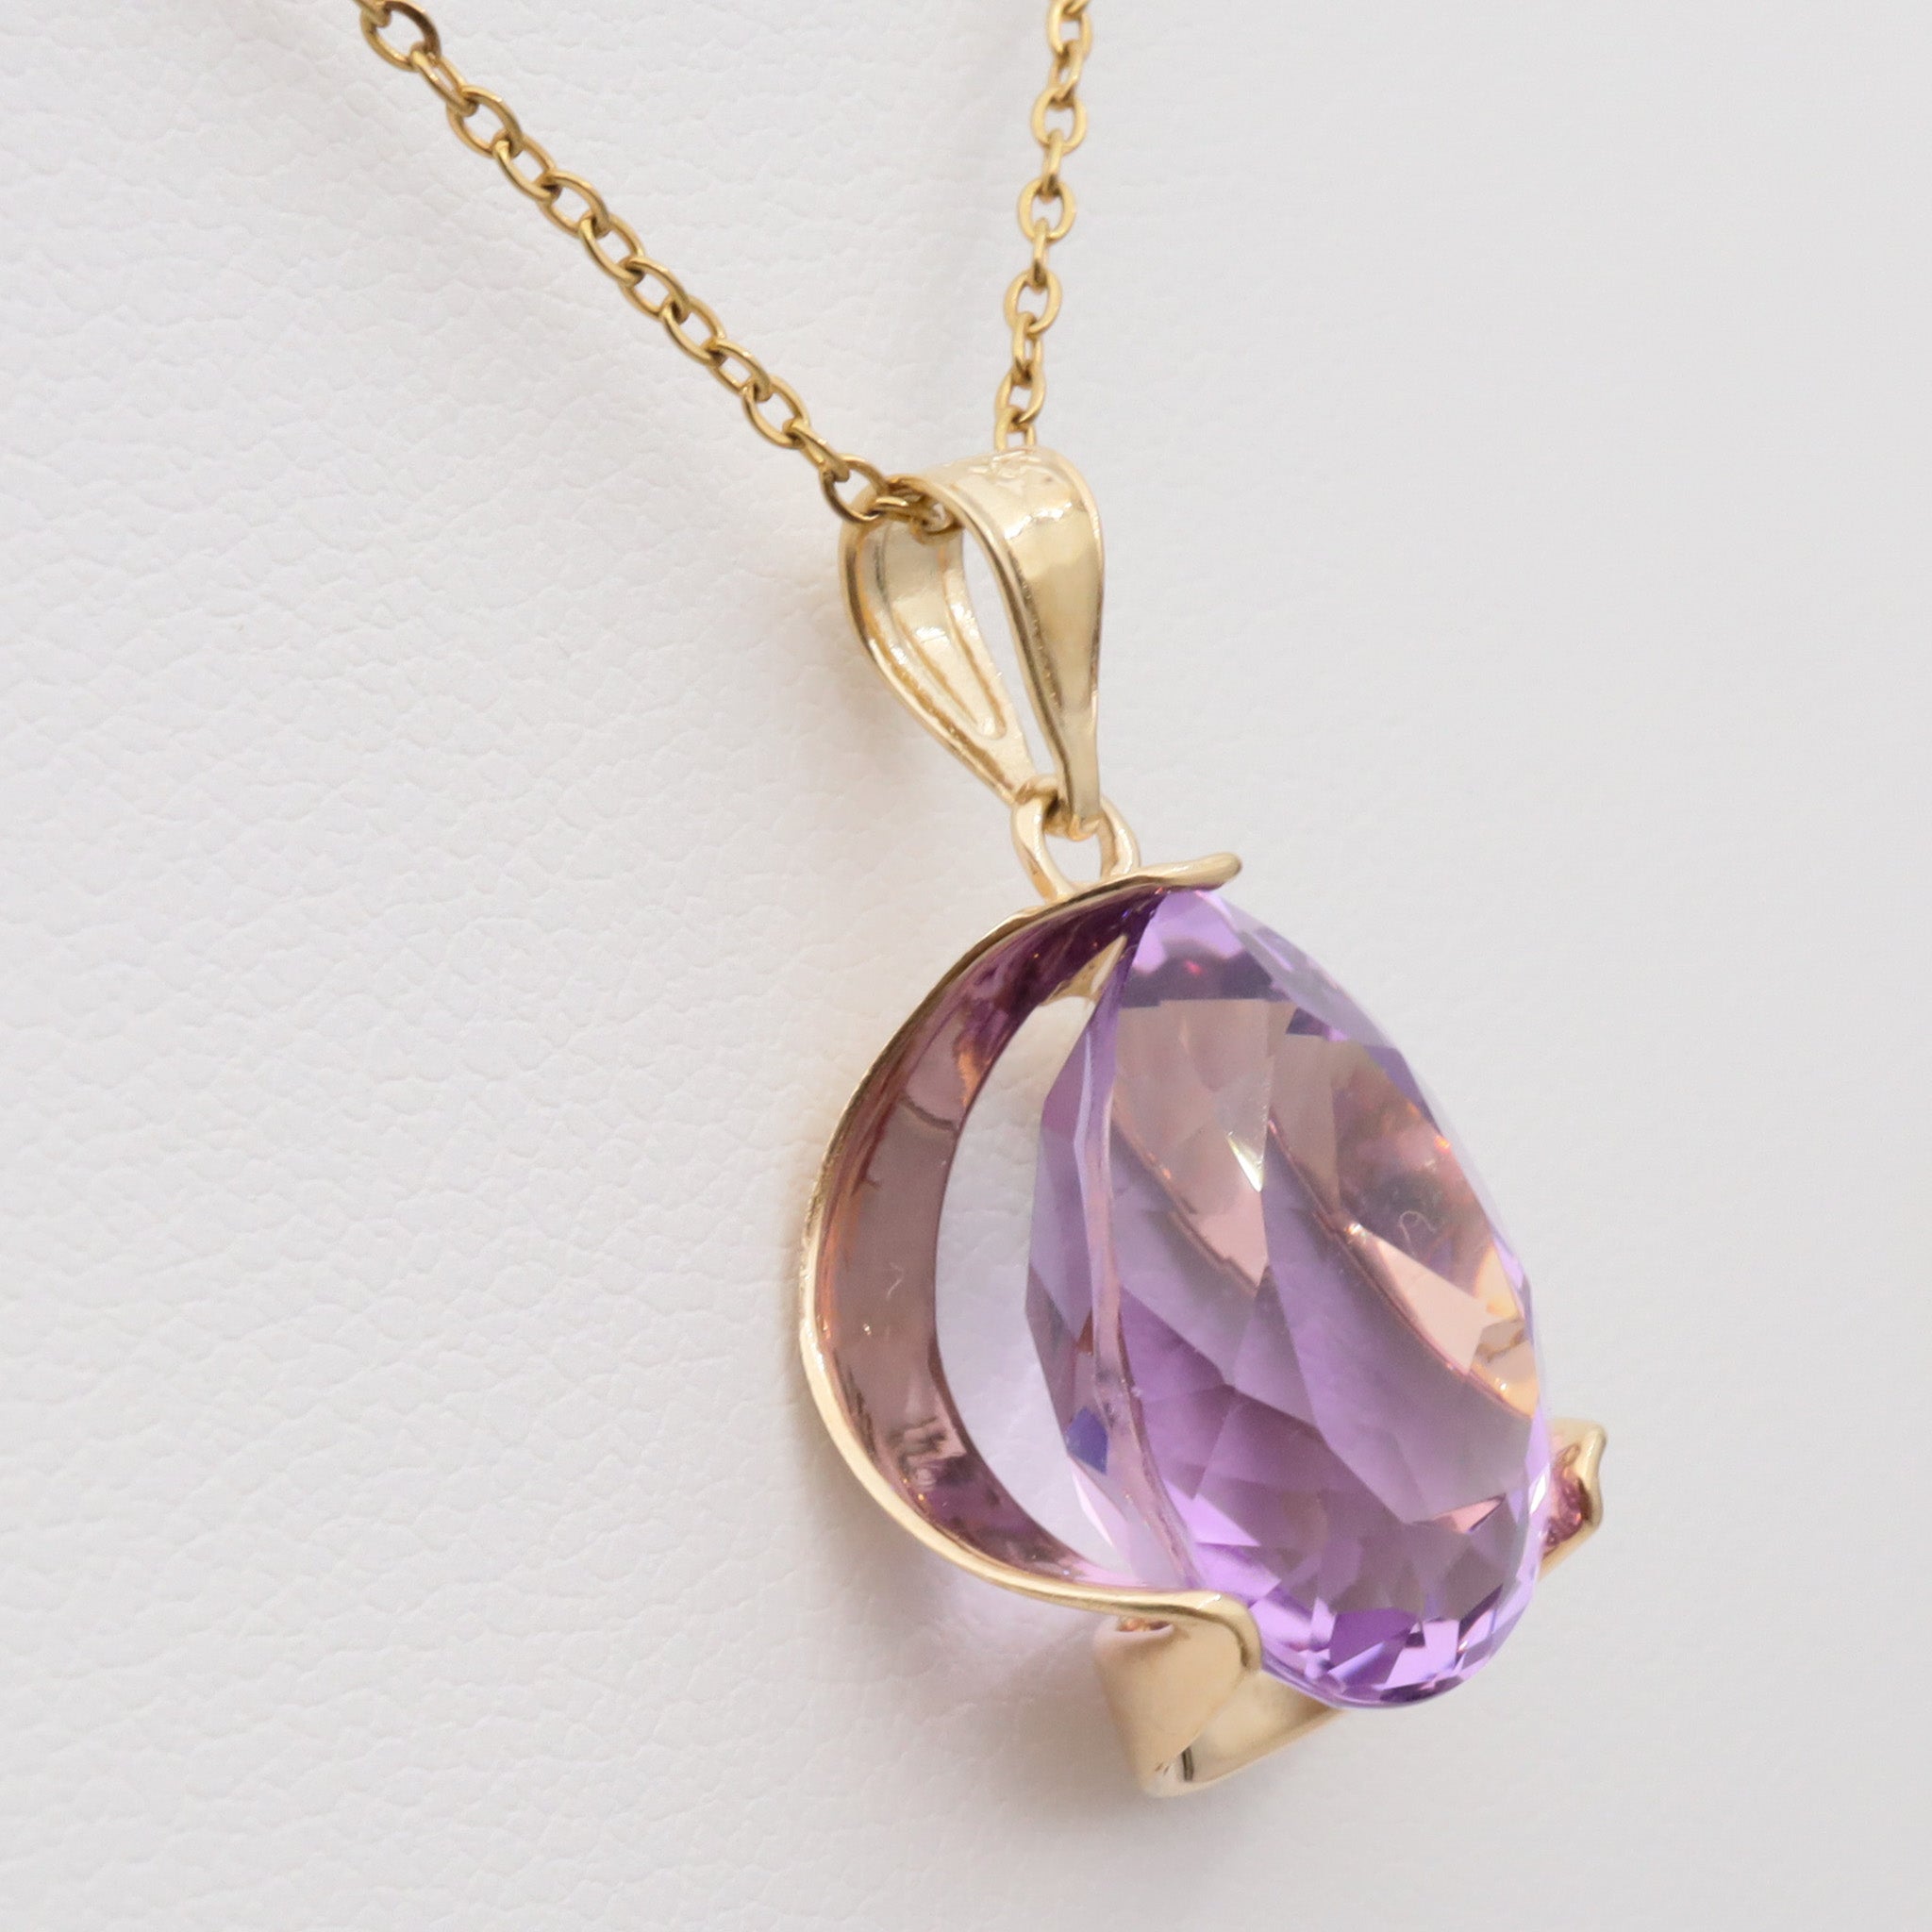 Vintage 14K gold and faceted pear amethyst pendant